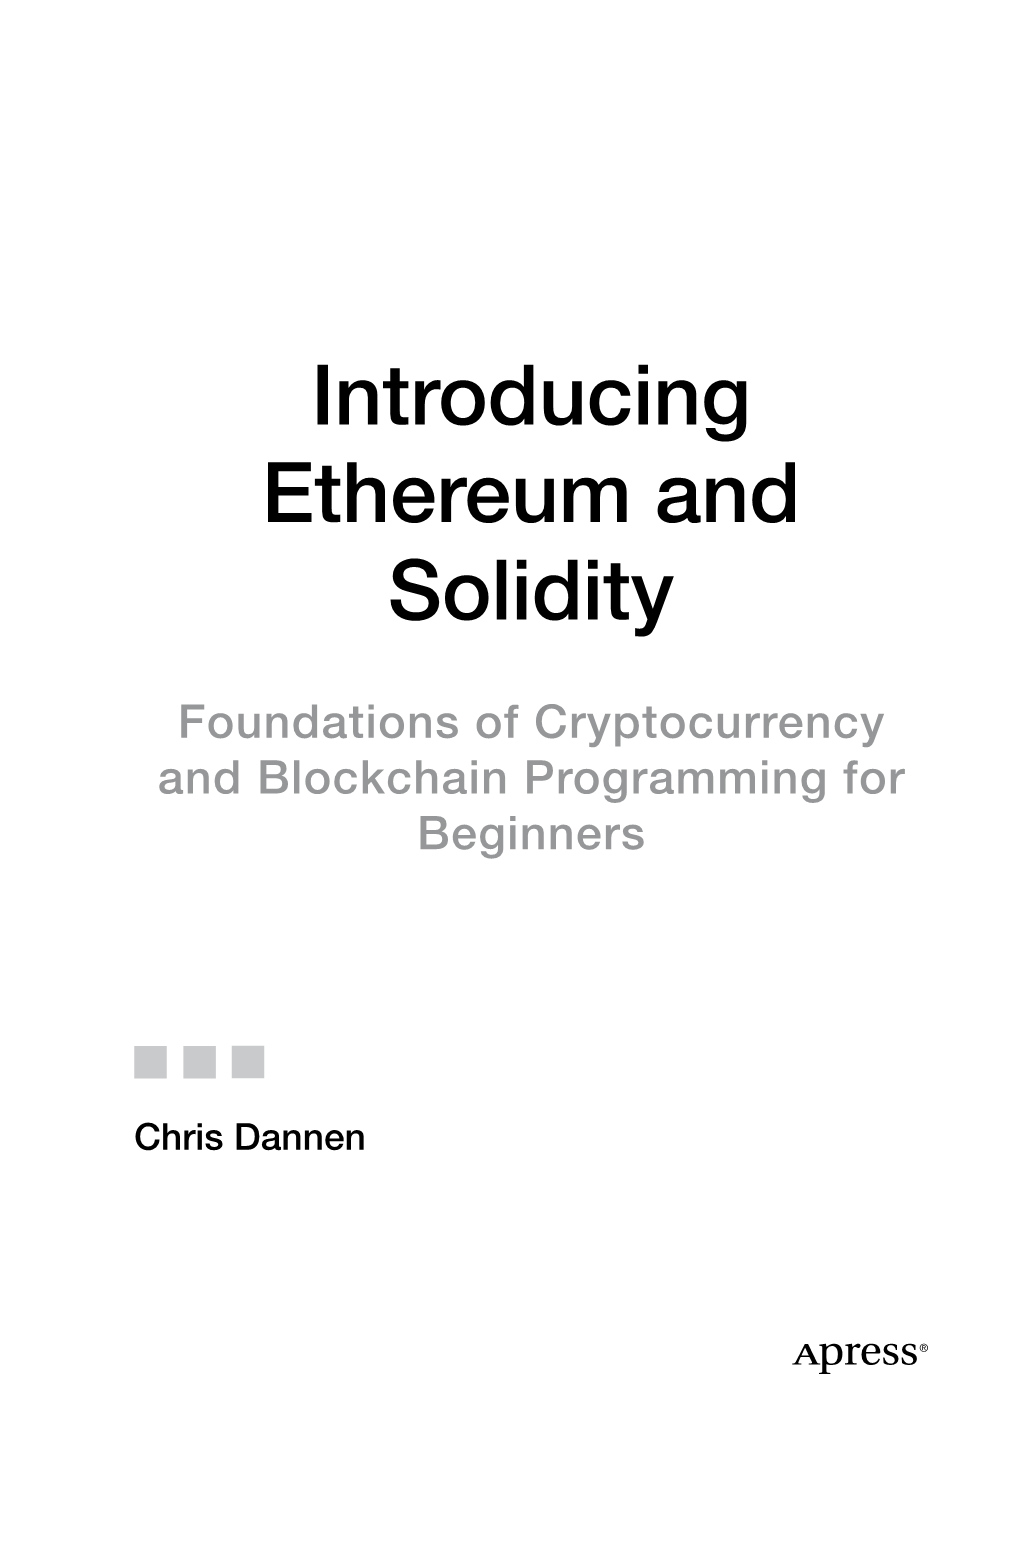 Introducing Ethereum and Solidity